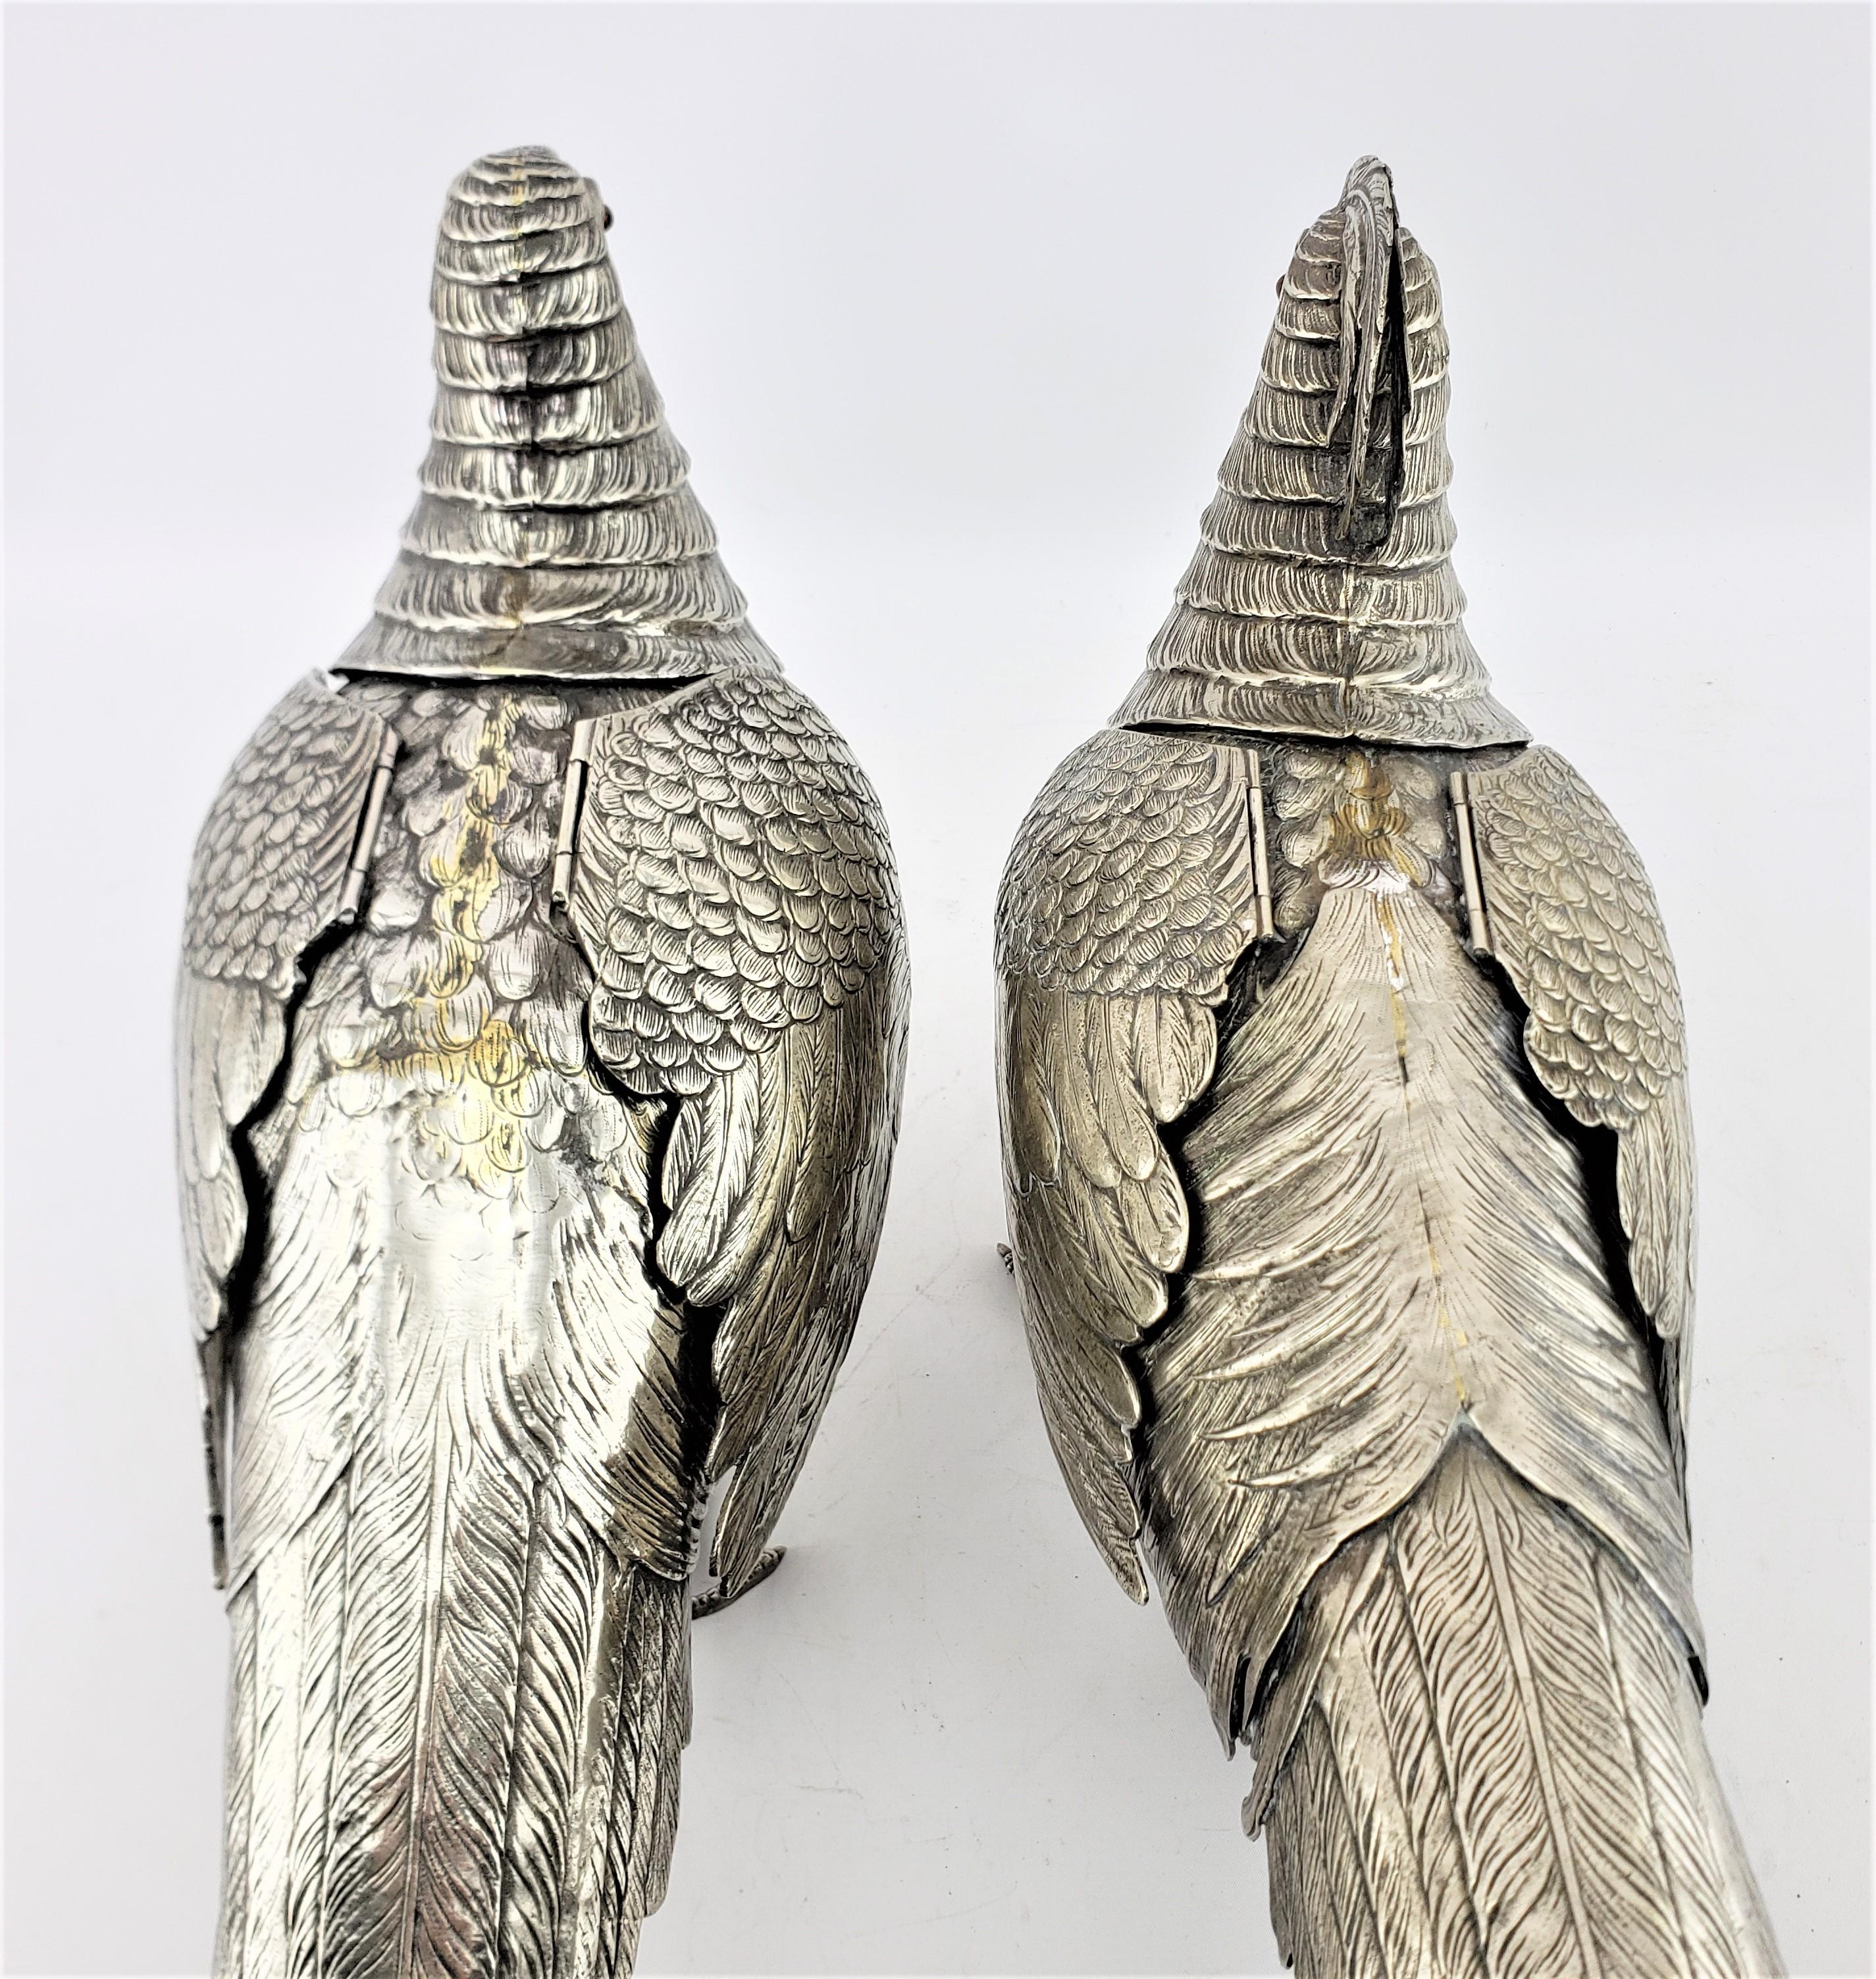 Pair of Large Antique Silver Plated Pheasant Sculptures with Articulated Wings For Sale 7